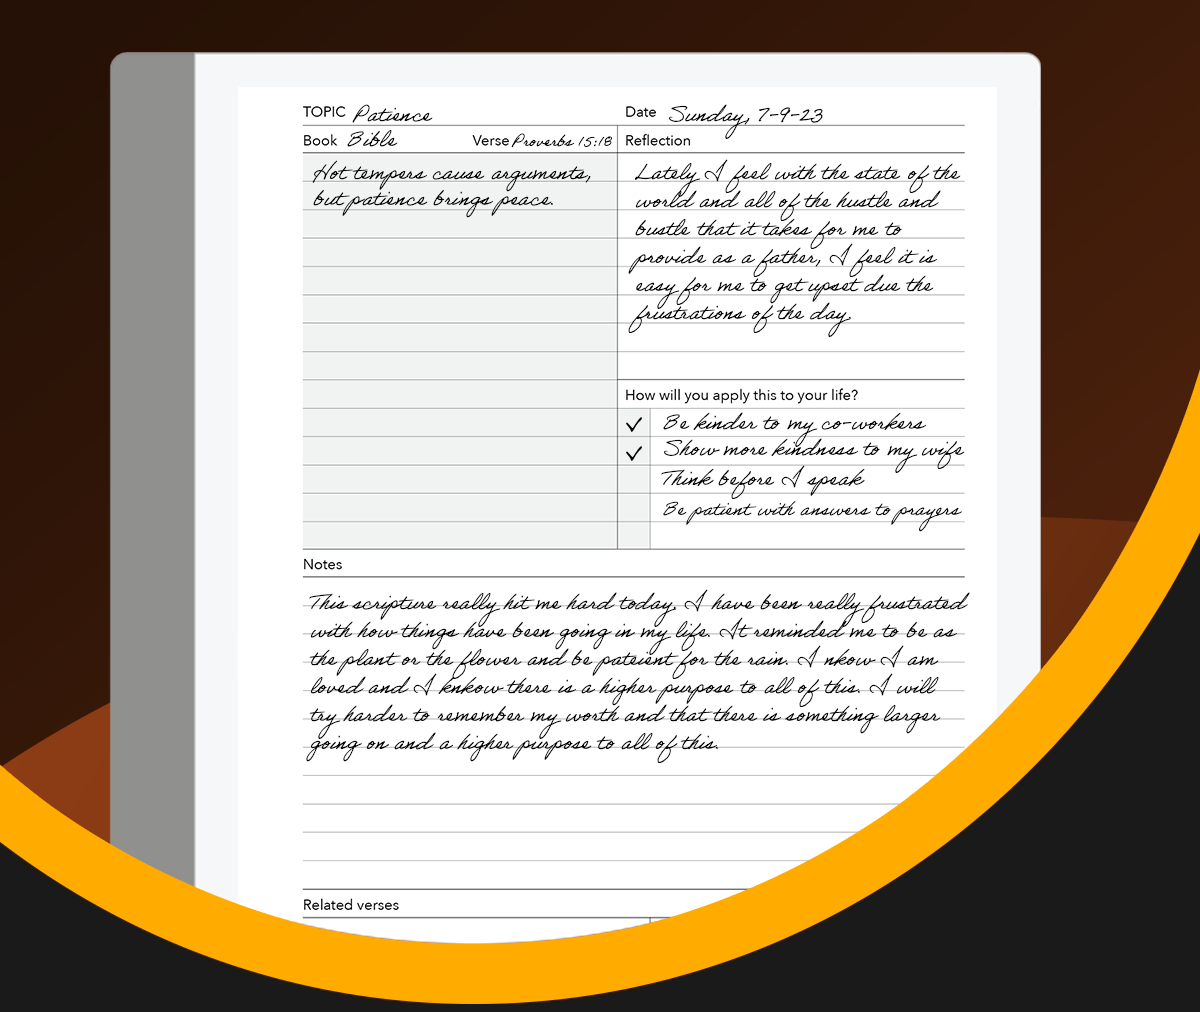 Scripture Study Template - Einkpads - reMarkable Templates